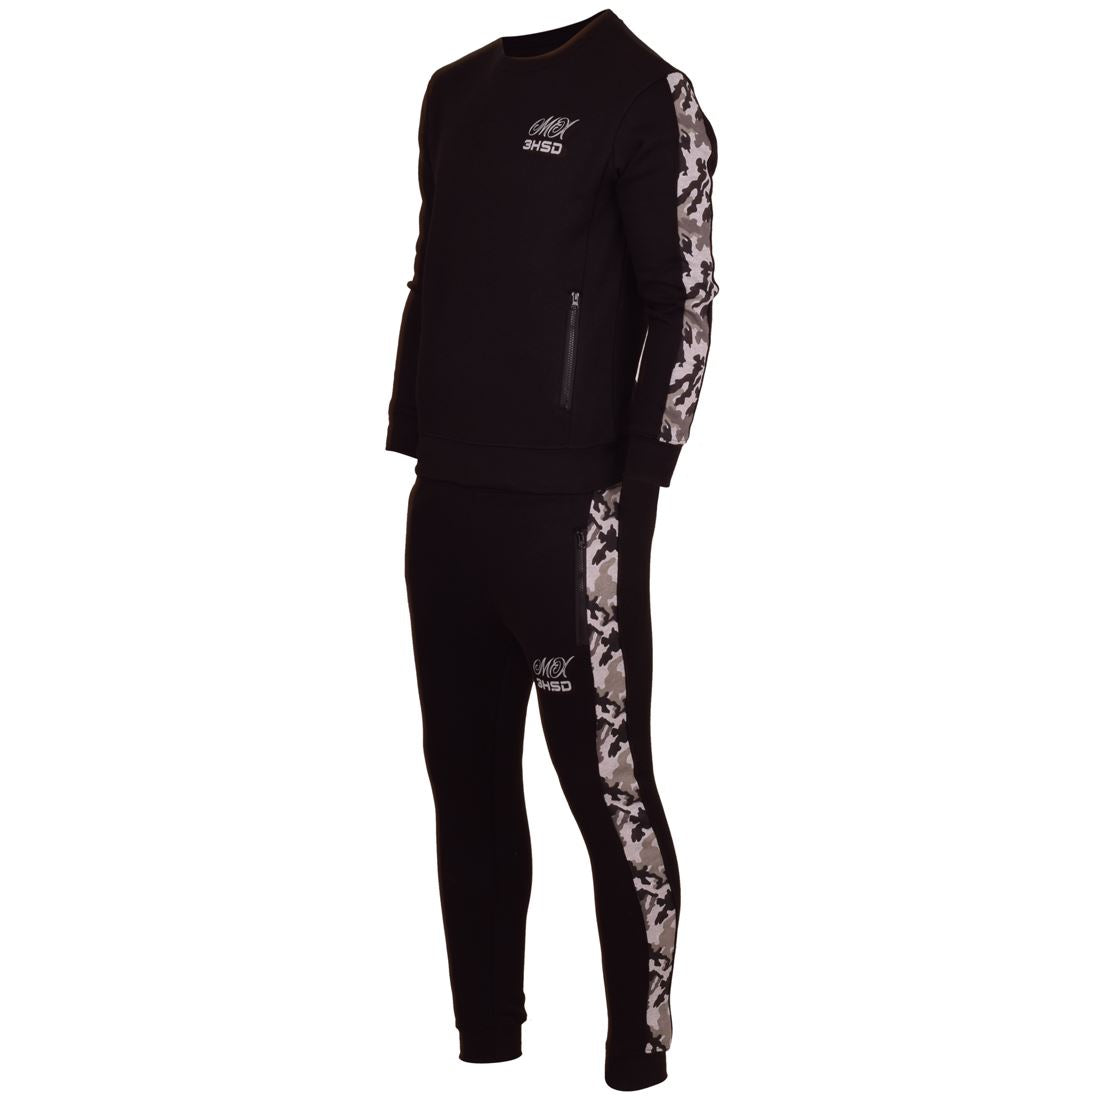 Mens MX360 Full Tracksuit Set Top + Bottoms, Camo Round Neck Top, Jogging Bottom- Top and Bottoms both have 2 Zip pockets